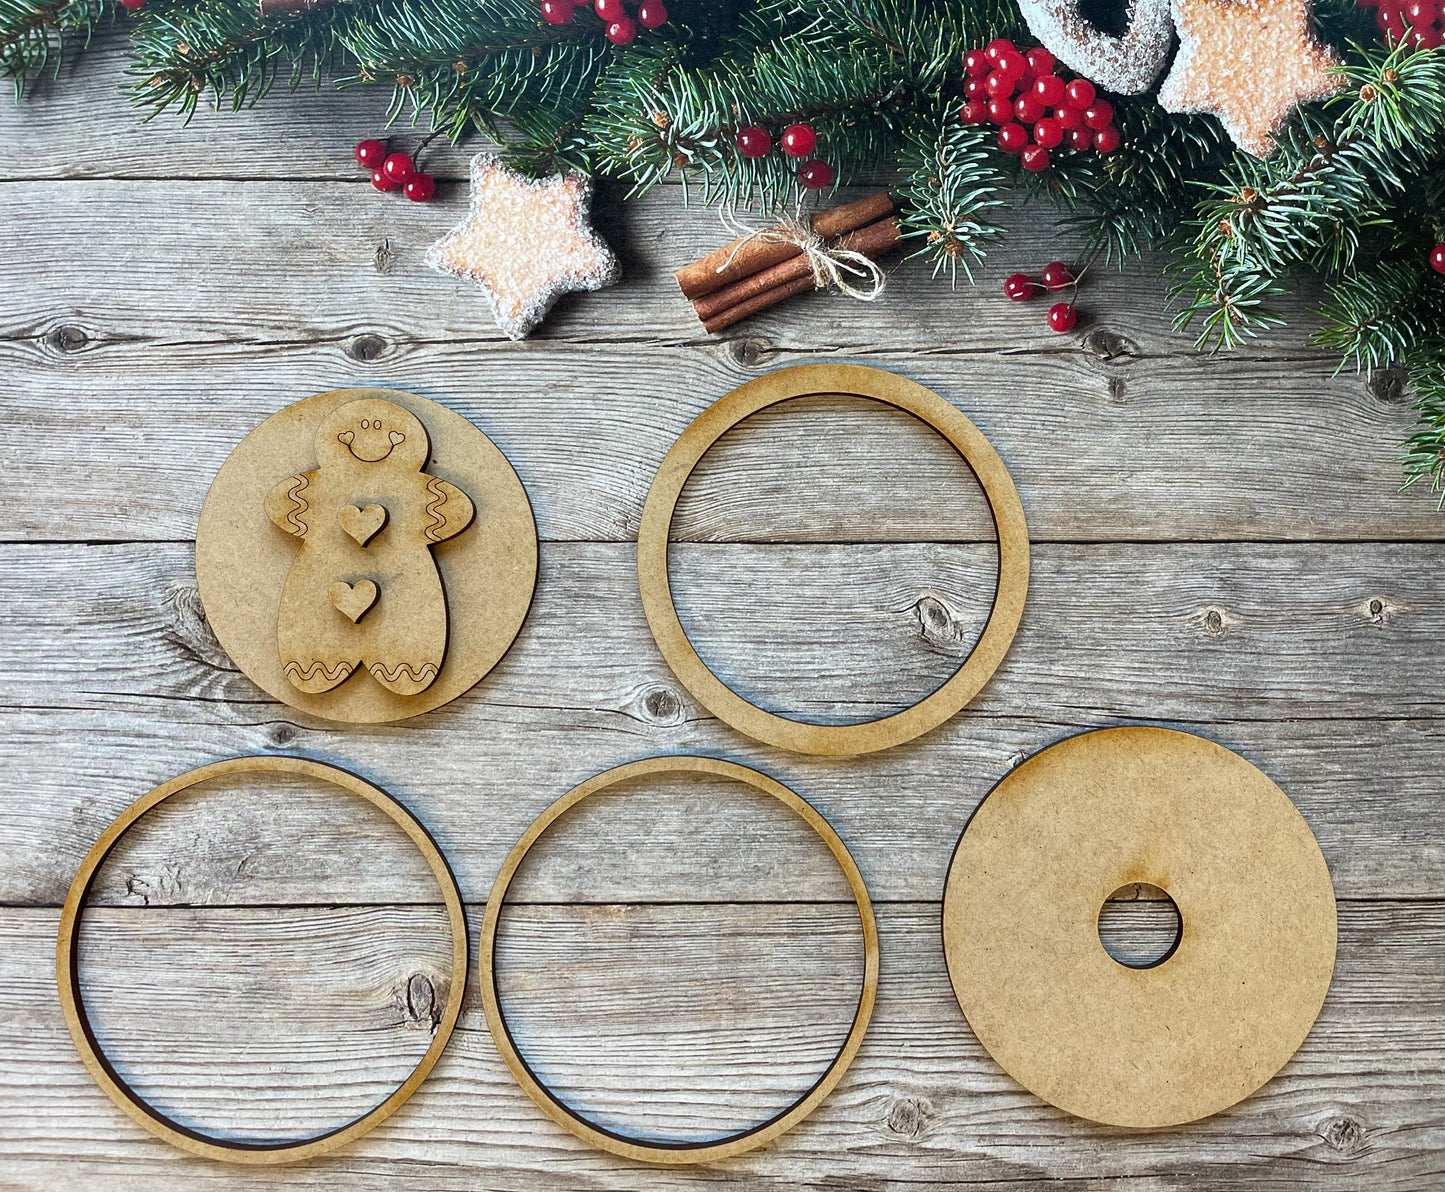 Gingerbread Small Changeable jar lid kit, unpainted wooden cutouts -  ready for you to paint